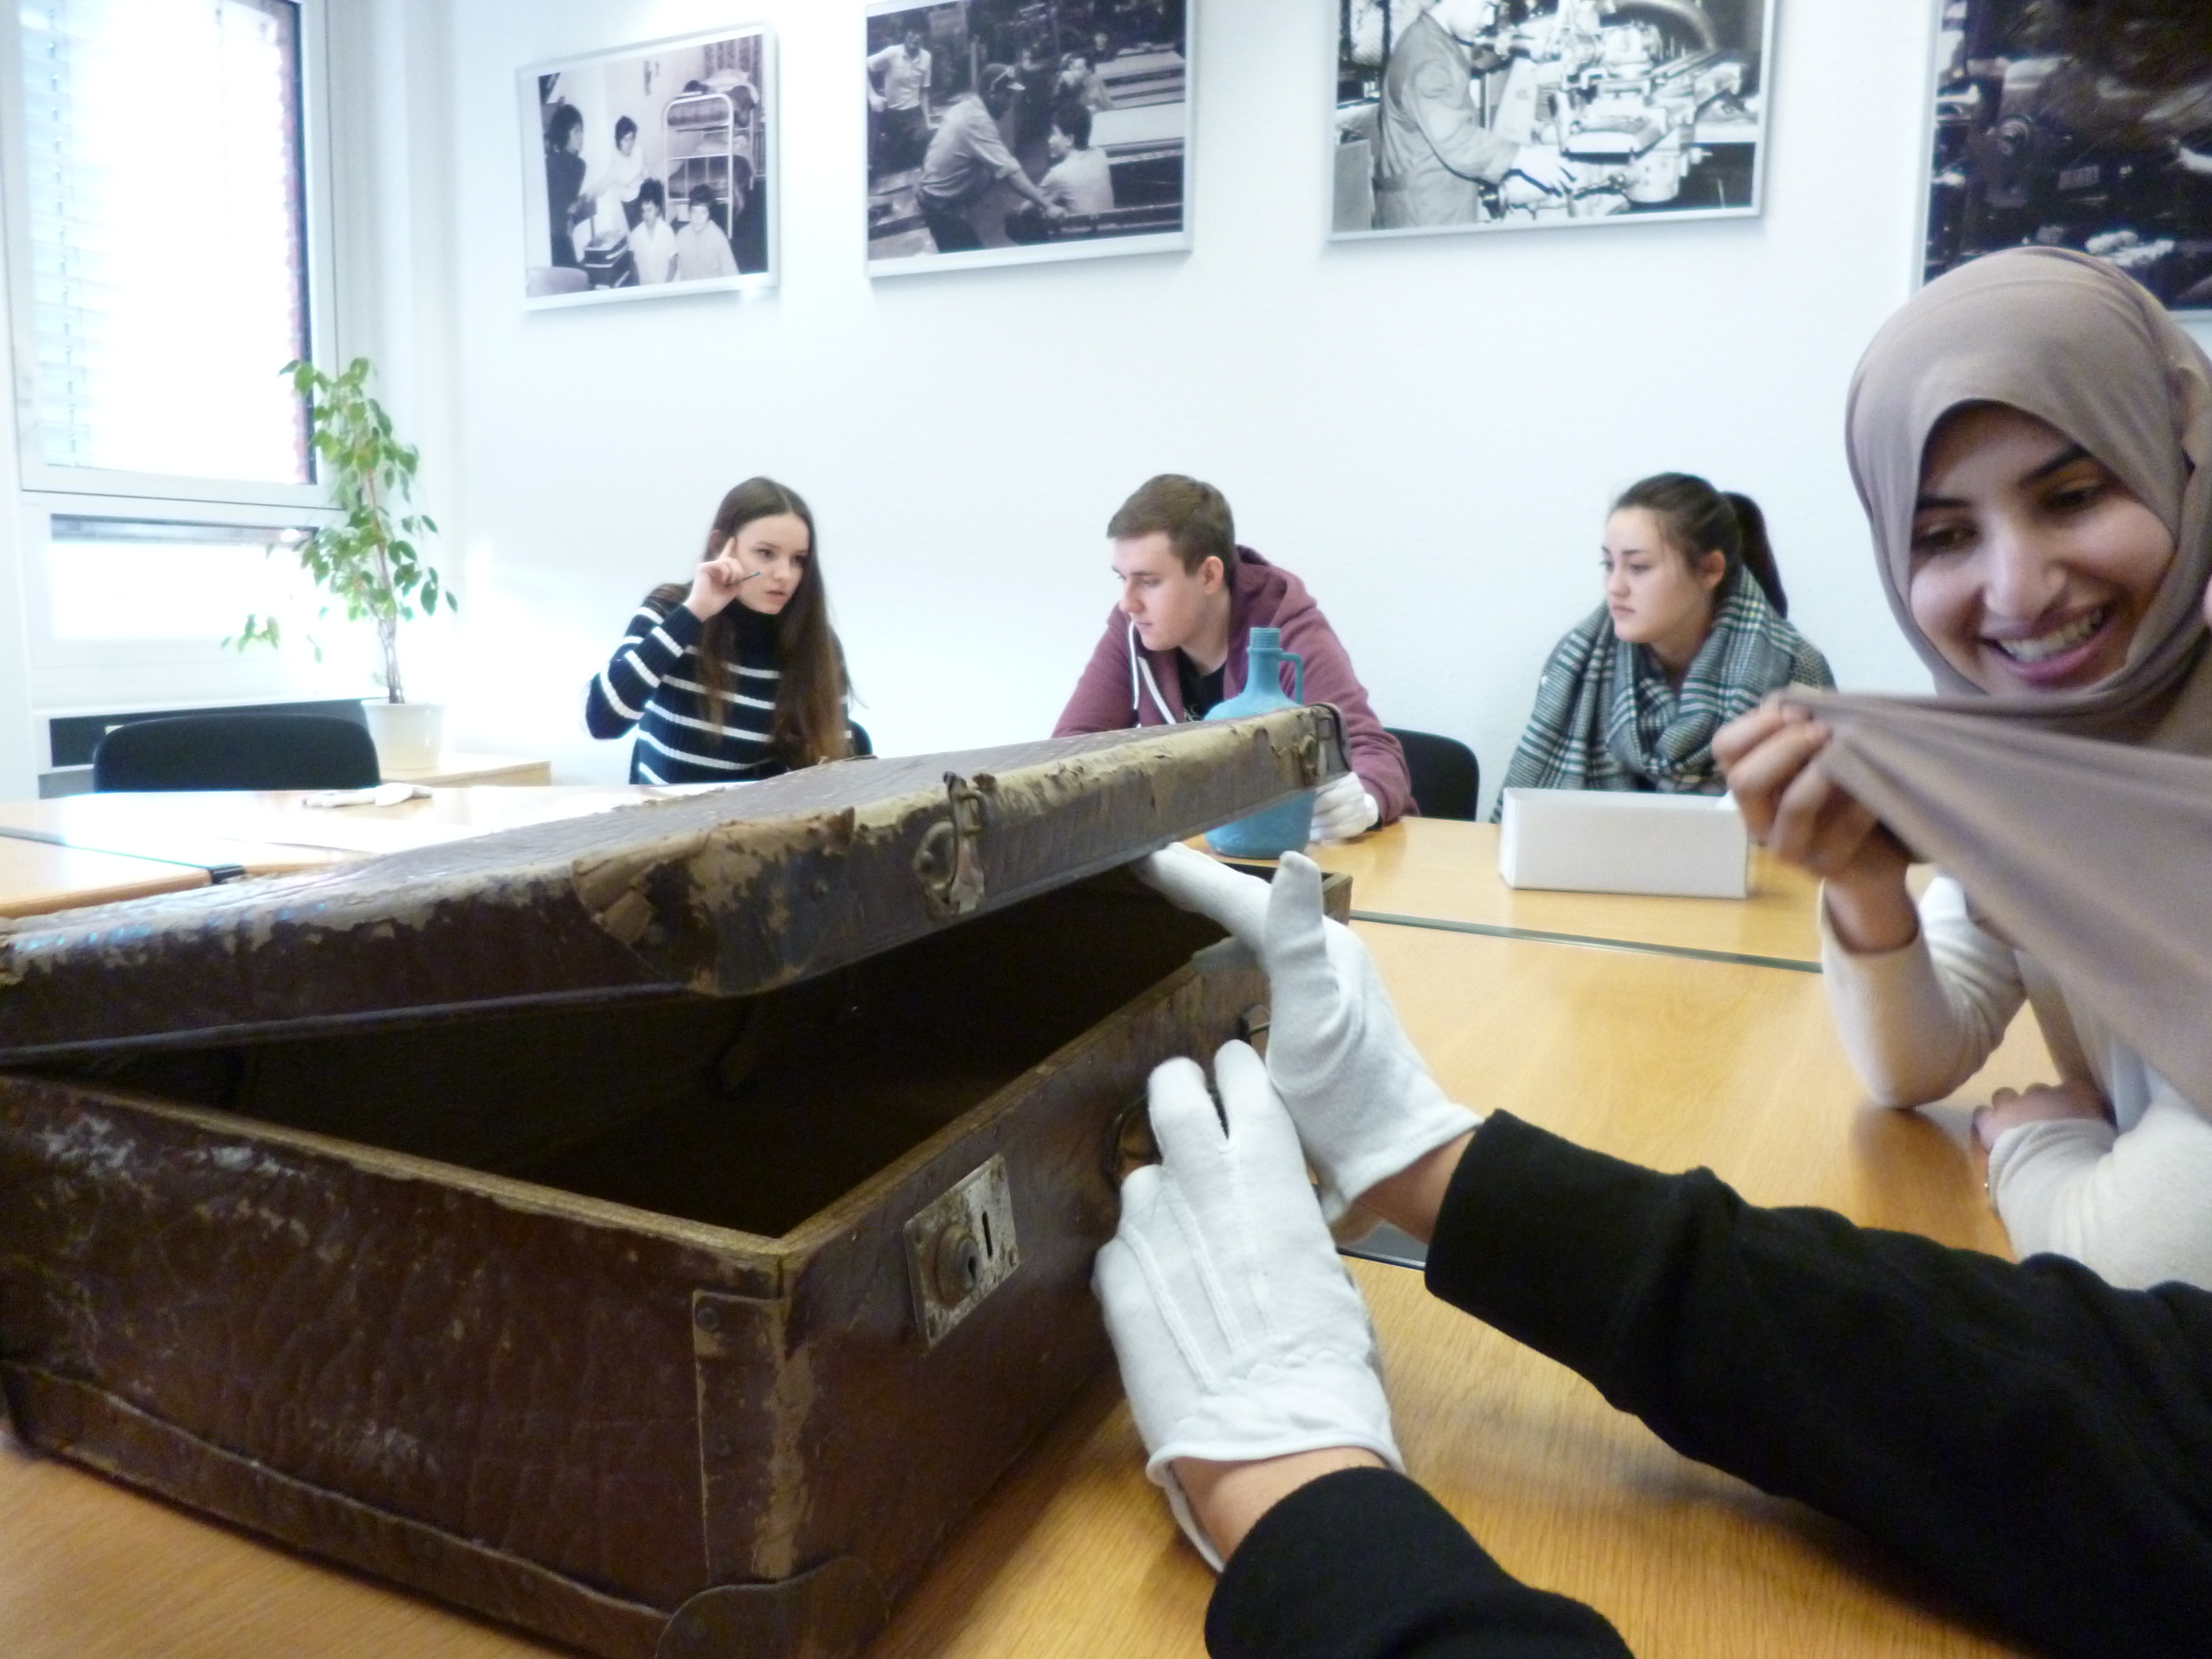 2014: "DOMiD macht Schule" (DOMiD goes to school): In the project, which DOMiD carried out as part of an educational partnership with the Käthe Kollwitz School from Leverkusen, seven teaching units on migration and migration history in Germany were developed. The collection of materials can be used as a basis for the thematic complex "German migration history" especially for the subject history of secondary levels I and II of all school types. Photo: DOMiD Archive, Cologne